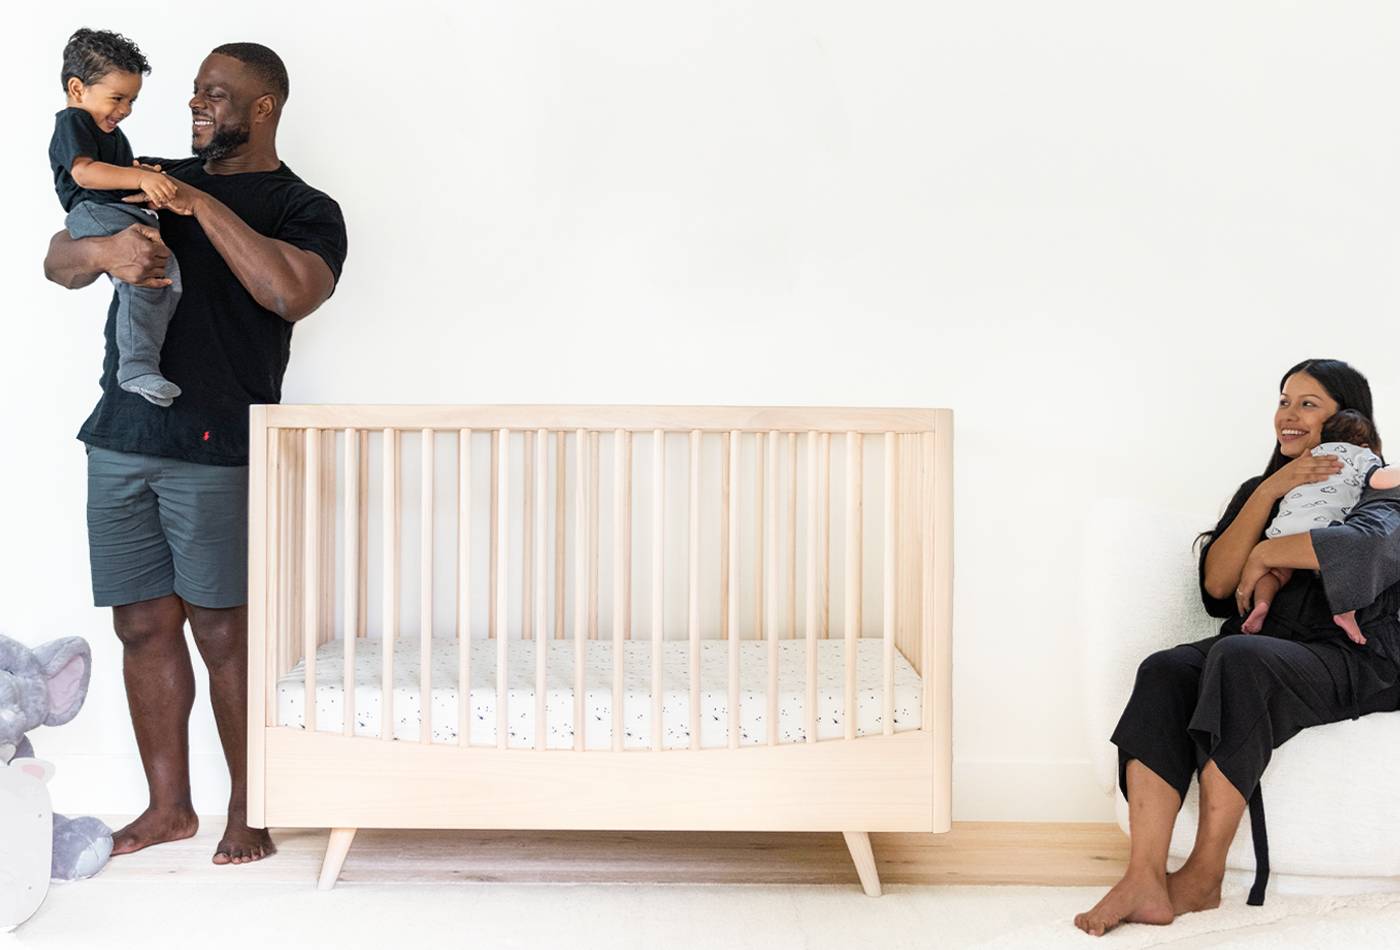 Baby Cribs Buying Guide